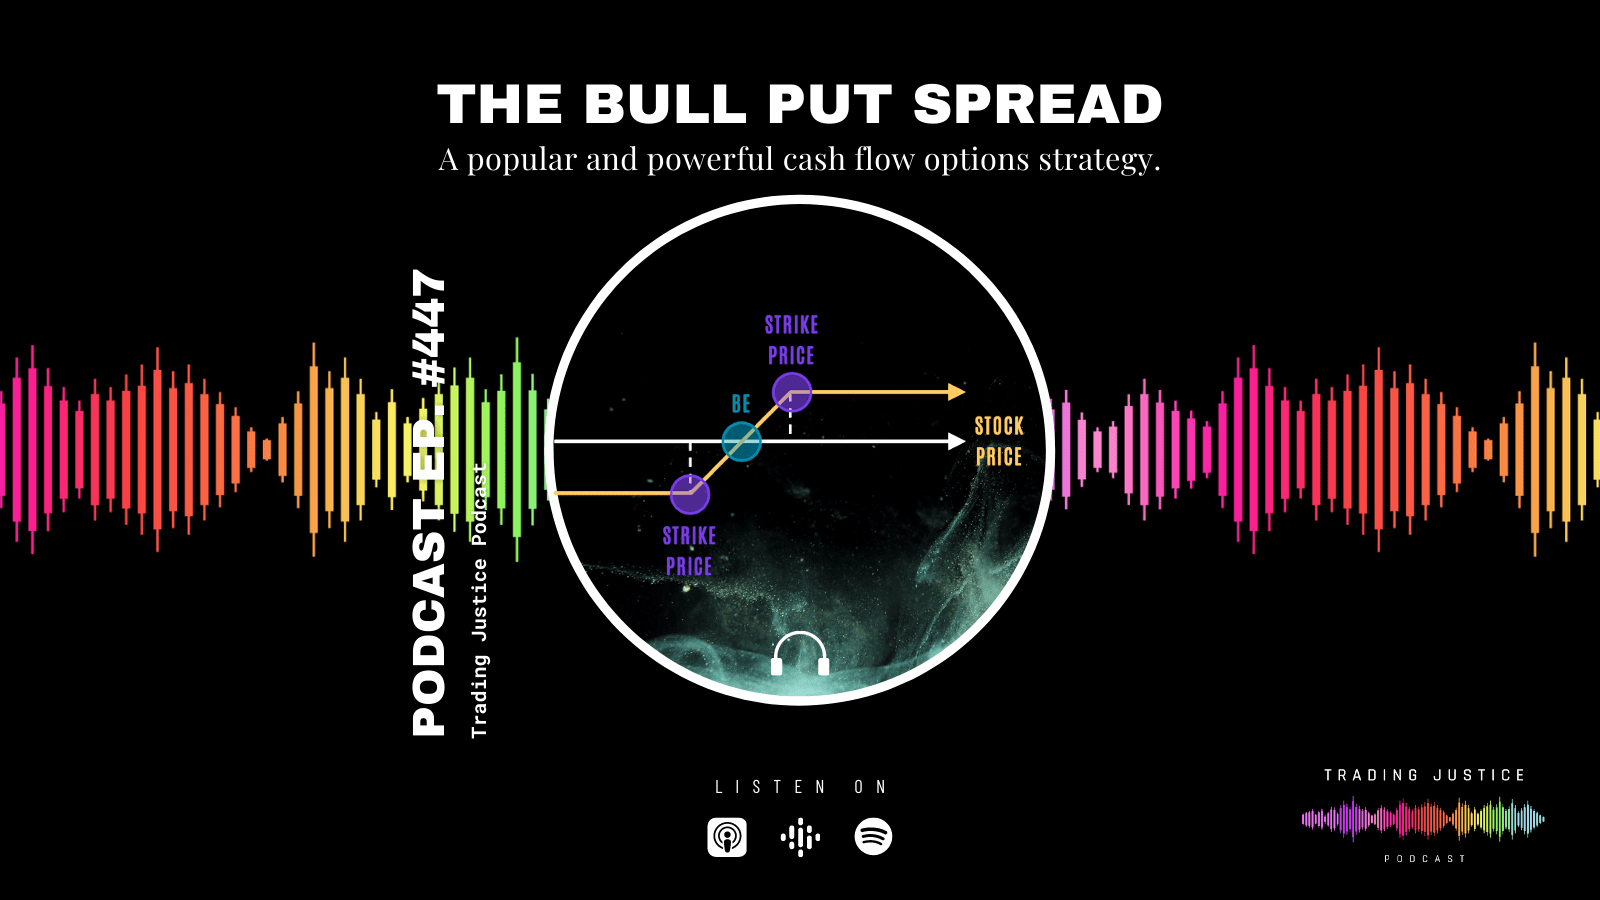 Trading Justice 447: The Bull Put Spread